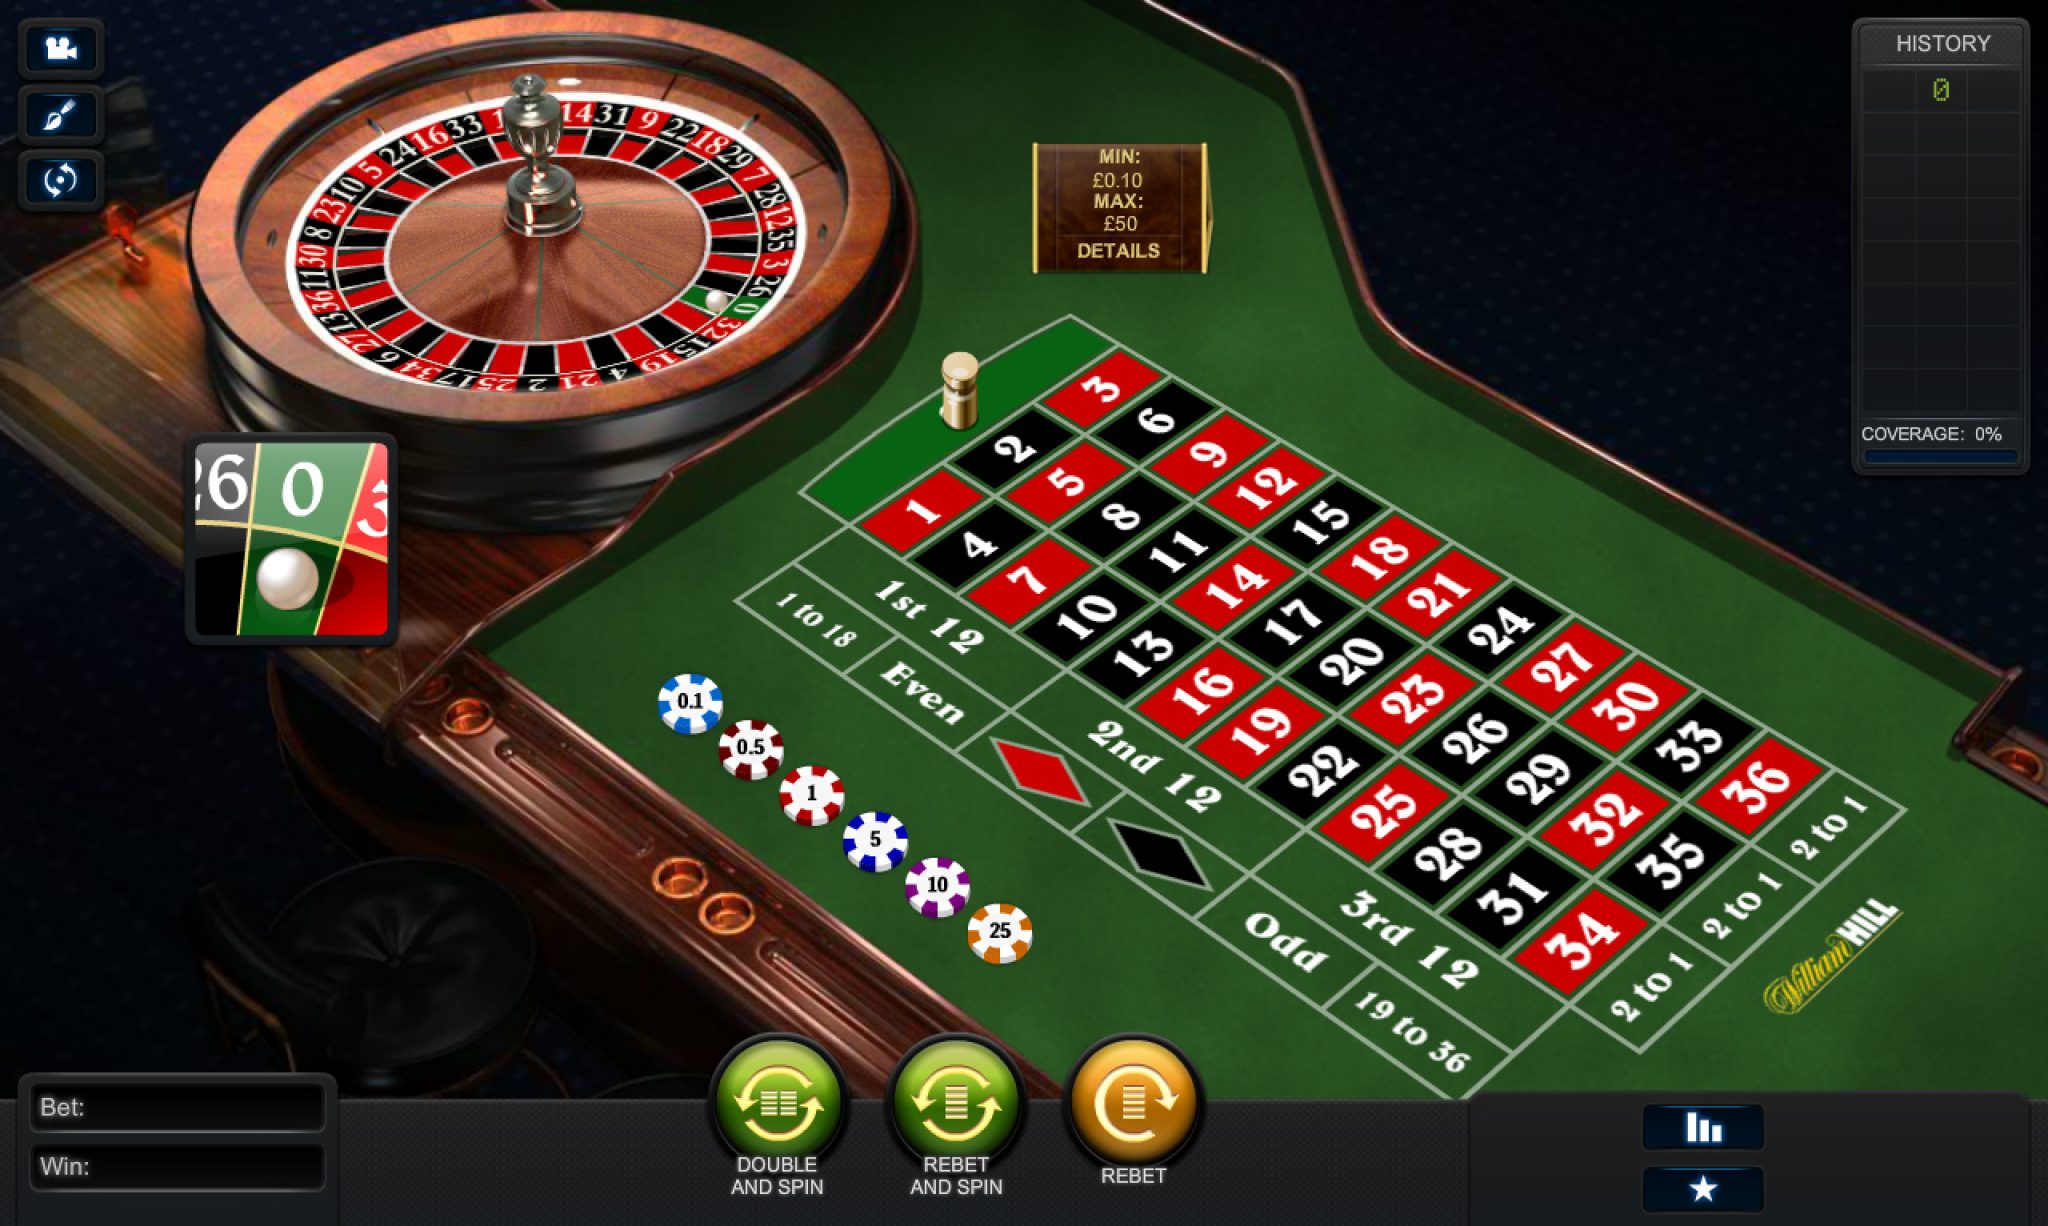 Roulette Free Play For Fun Gambling